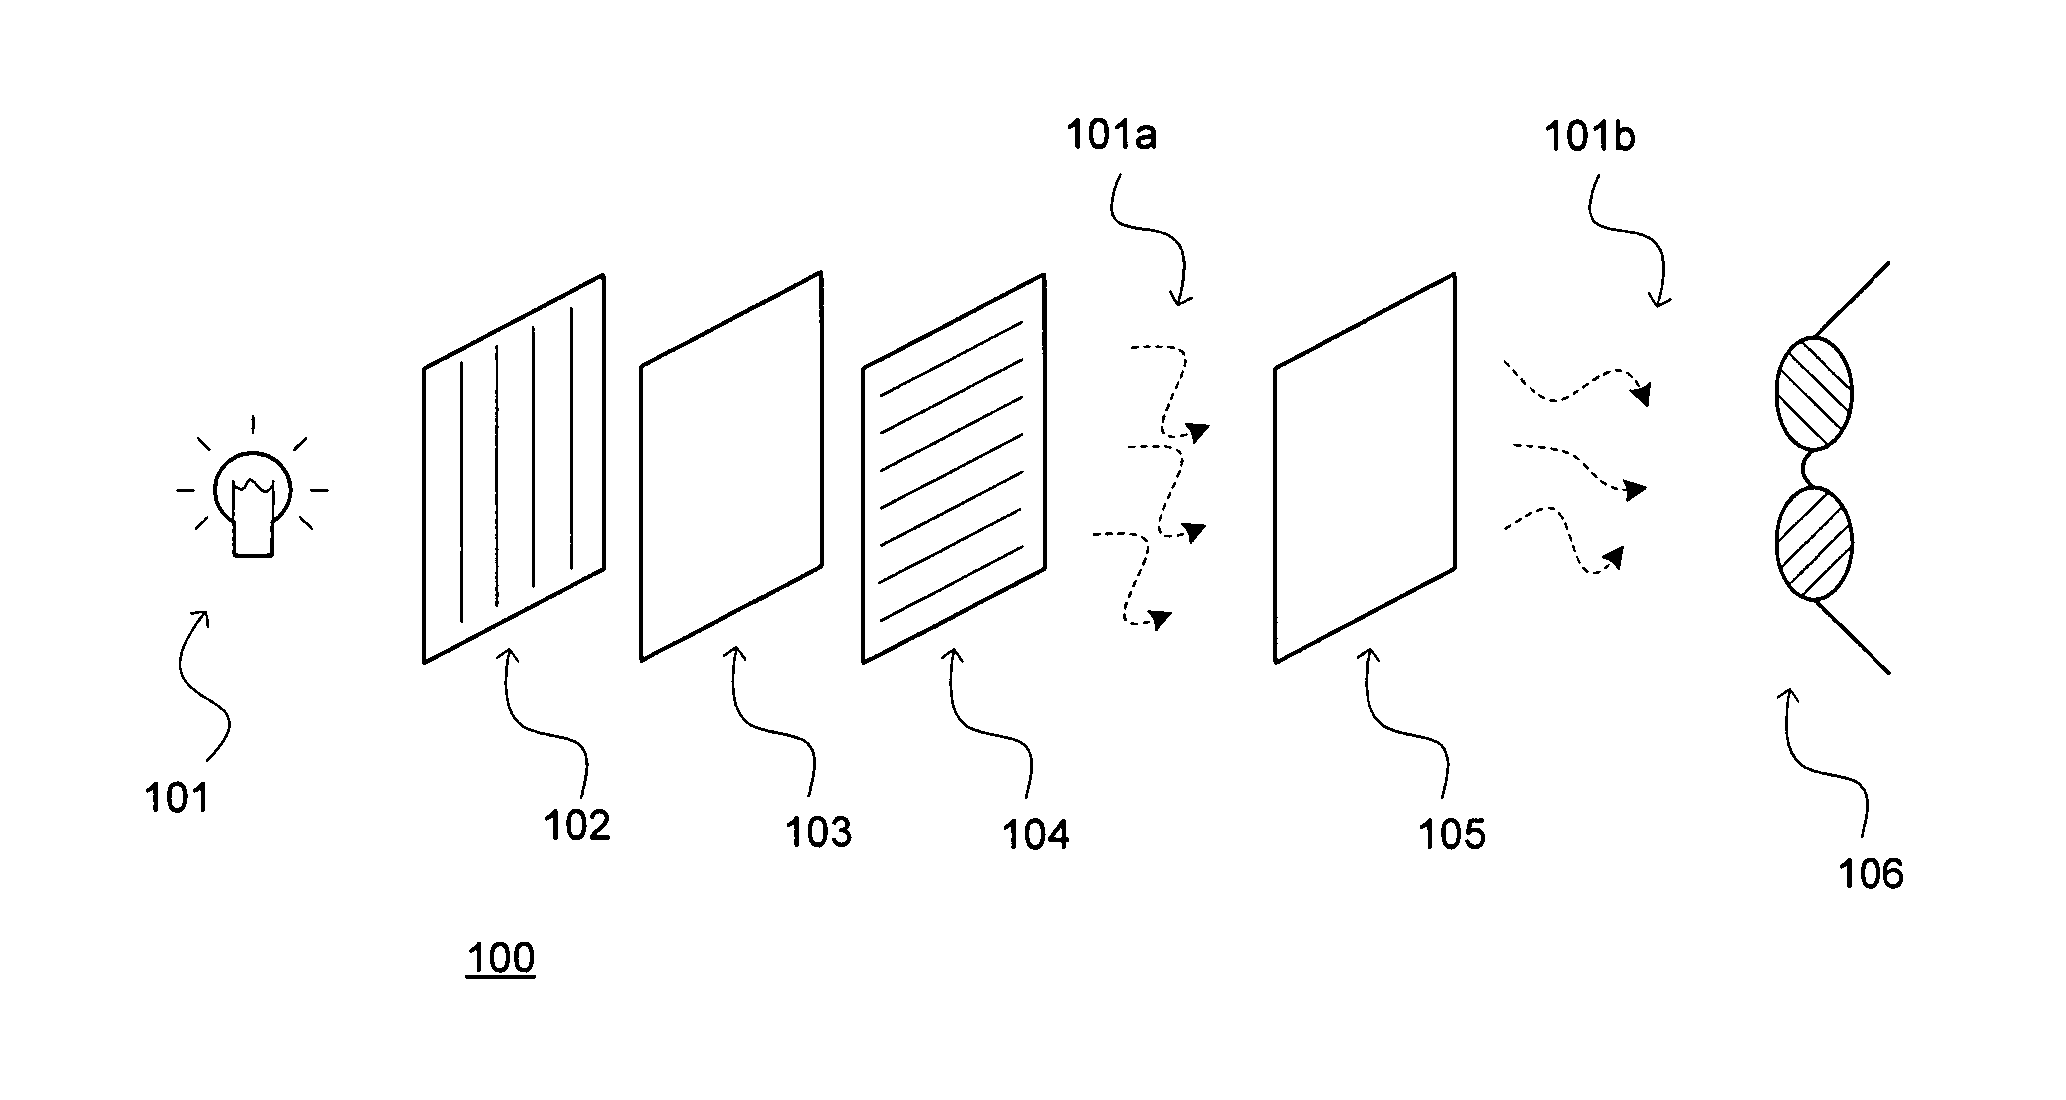 Two-panel liquid crystal system with circular polarization and polarizer glasses suitable for three dimensional imaging